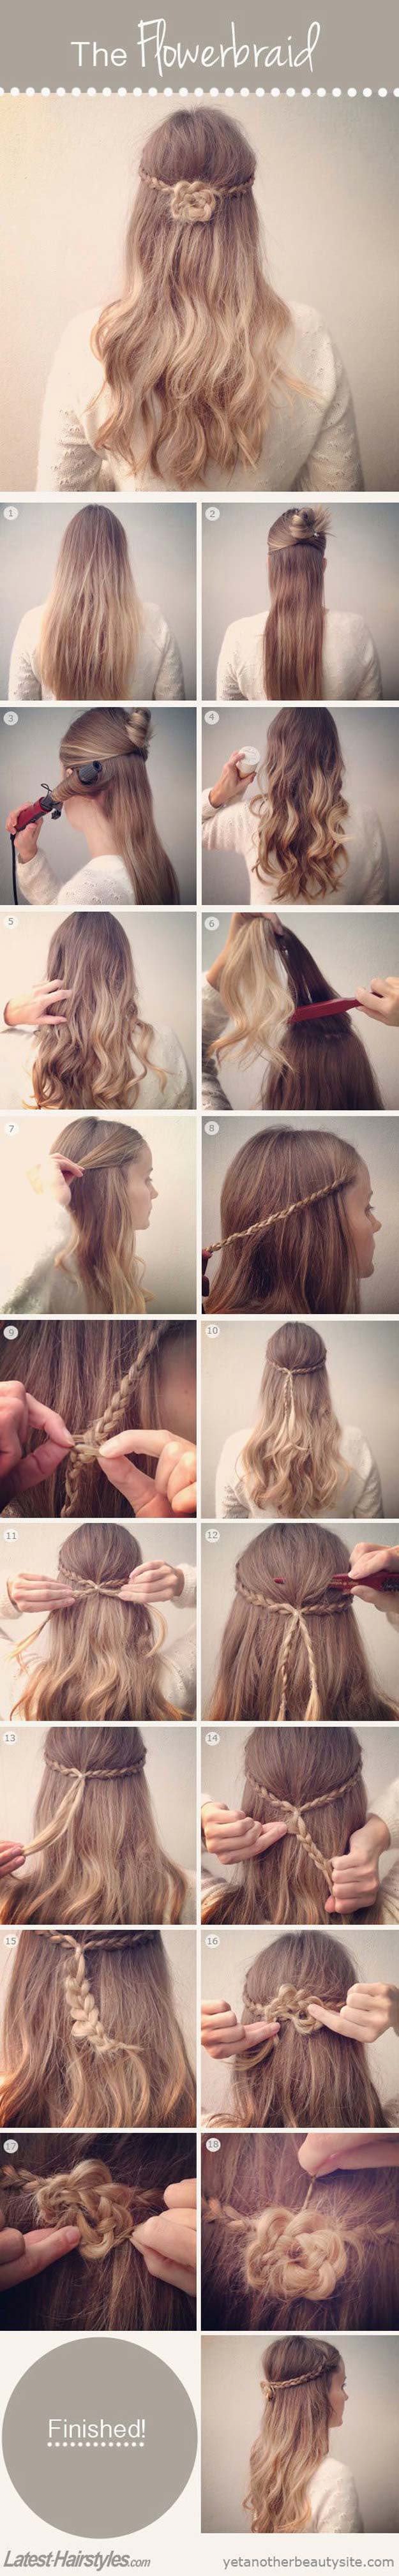 Best Hair Braiding Tutorials - How to Braid Your Hair Into a Pretty Flower - Easy Step by Step Tutorials for Braids - How To Braid Fishtail, French Braids, Flower Crown, Side Braids, Cornrows, Updos - Cool Braided Hairstyles for Girls, Teens and Women - School, Day and Evening, Boho, Casual and Formal Looks #hairstyles #braiding #braidingtutorials #diyhair 